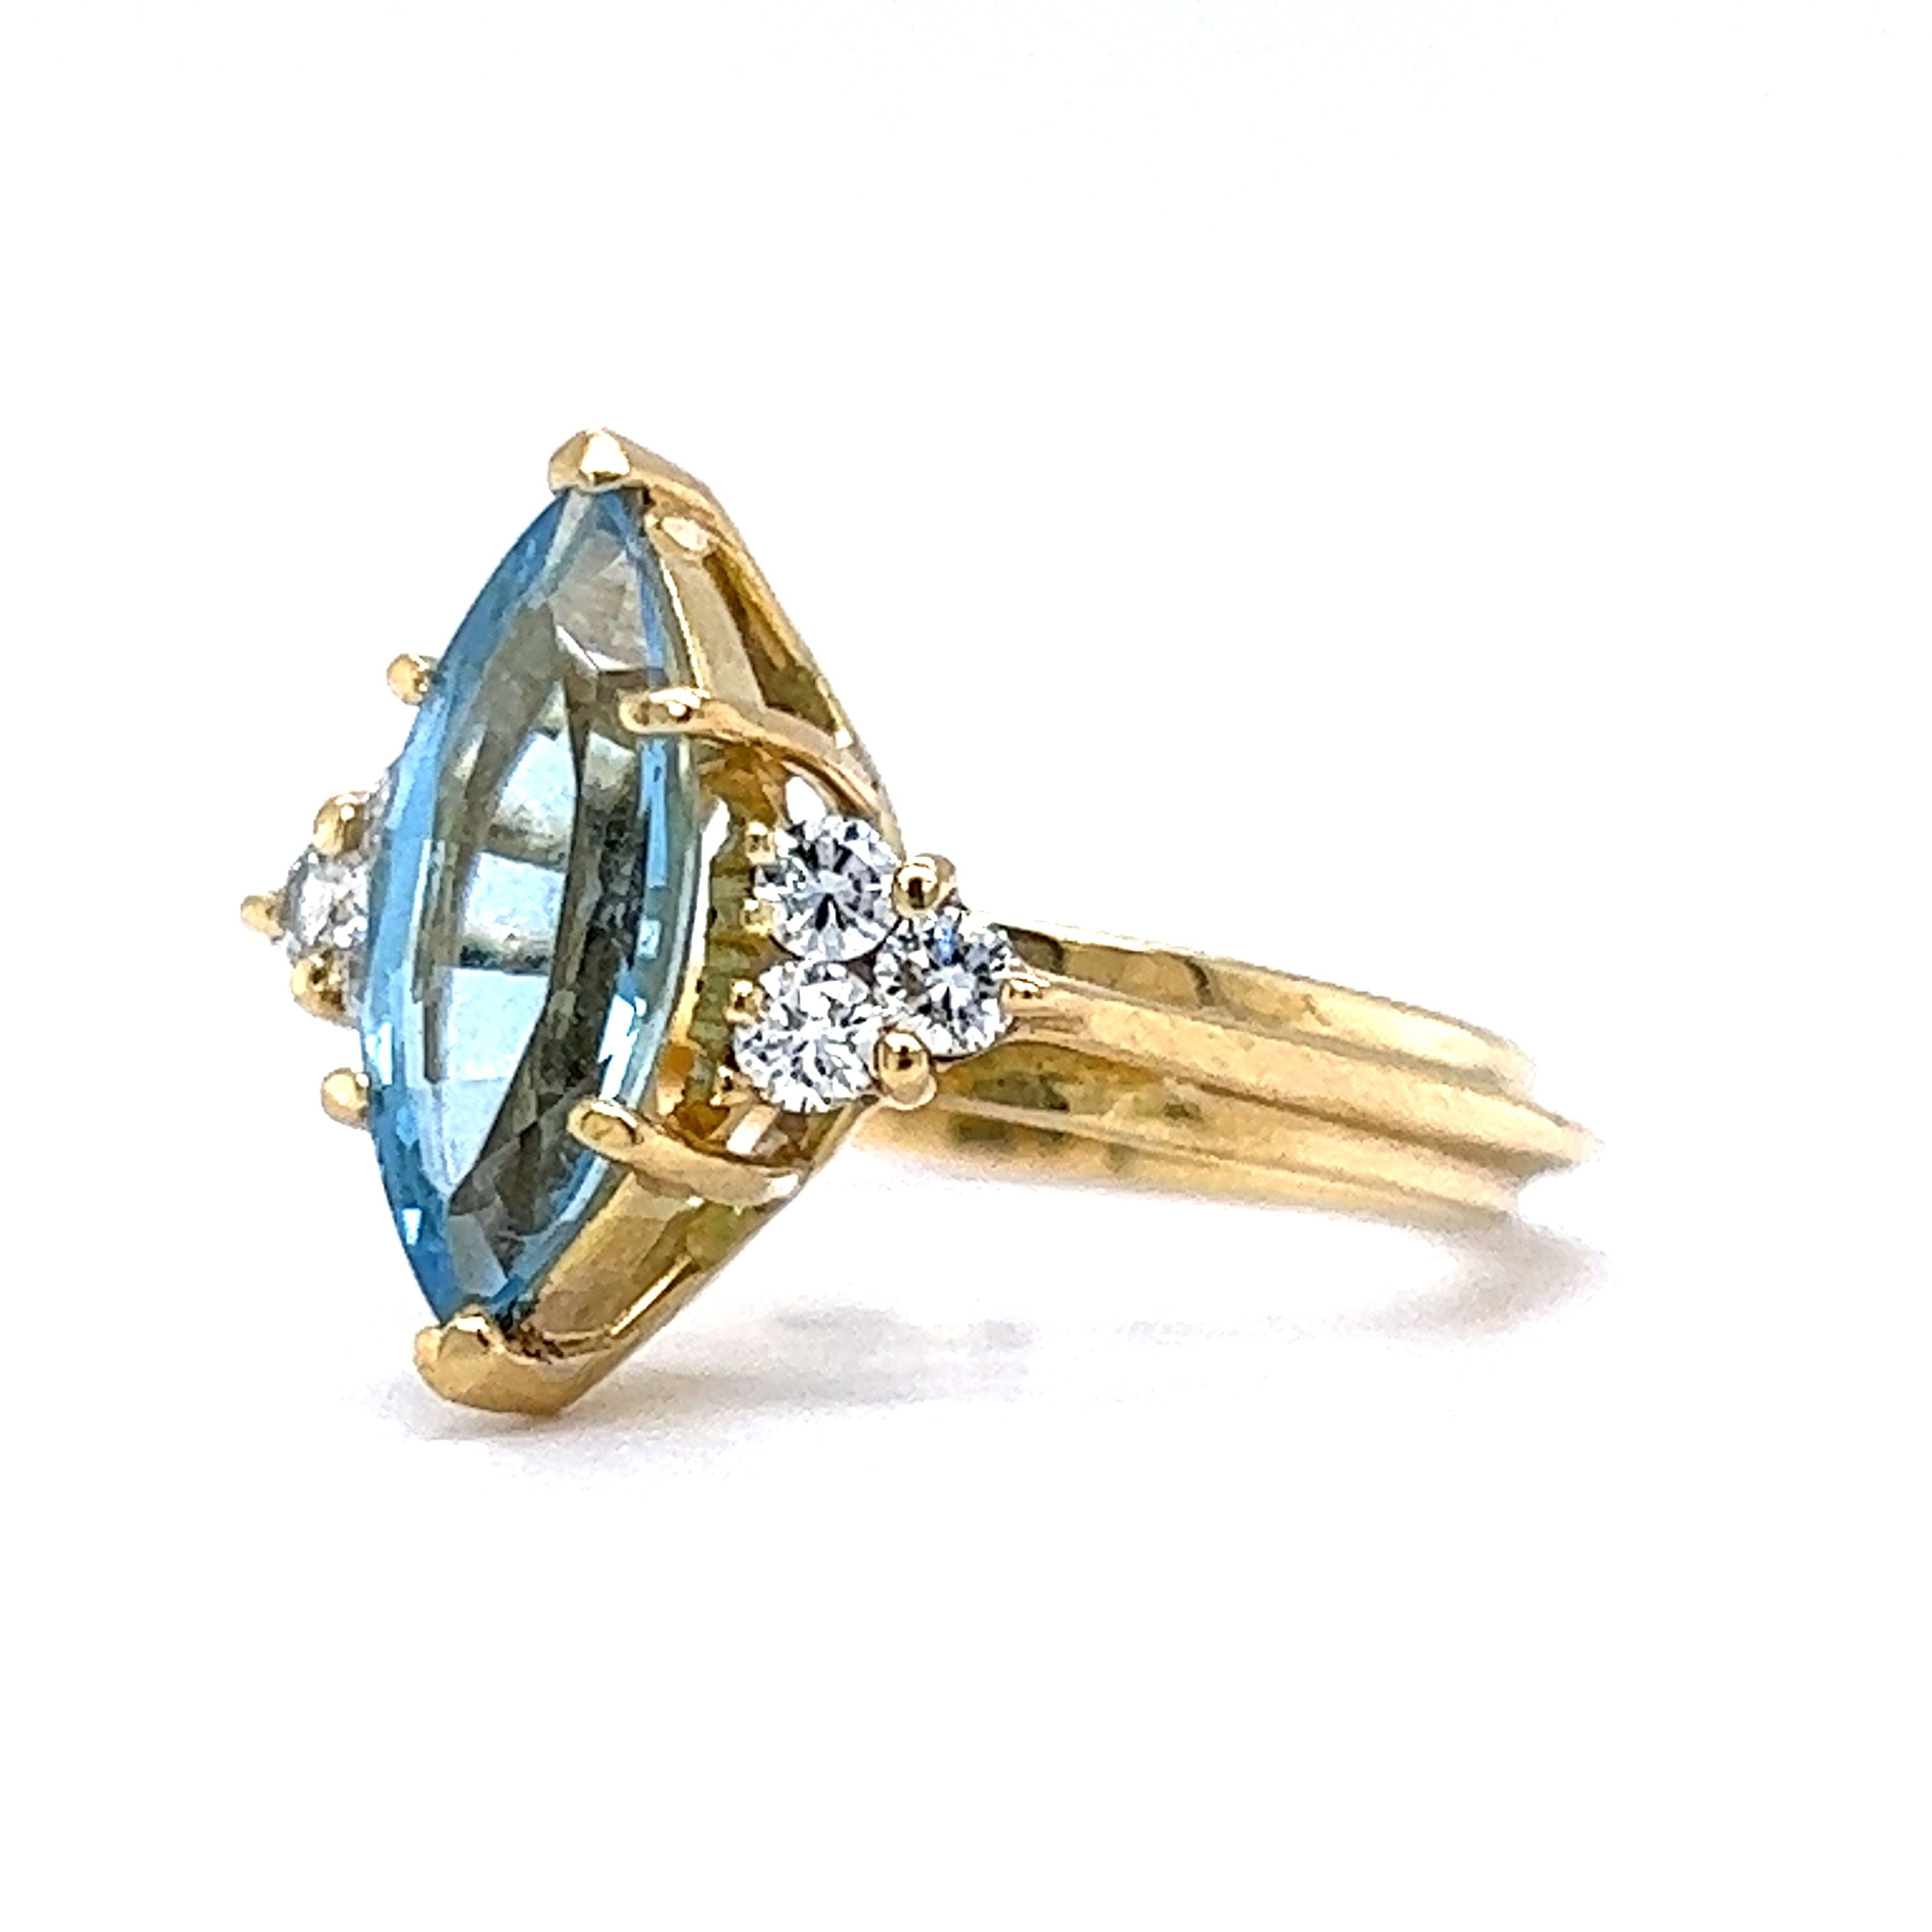 Marquise Cut Aquamarine & Diamond Cocktail Ring in 18k Yellow Gold